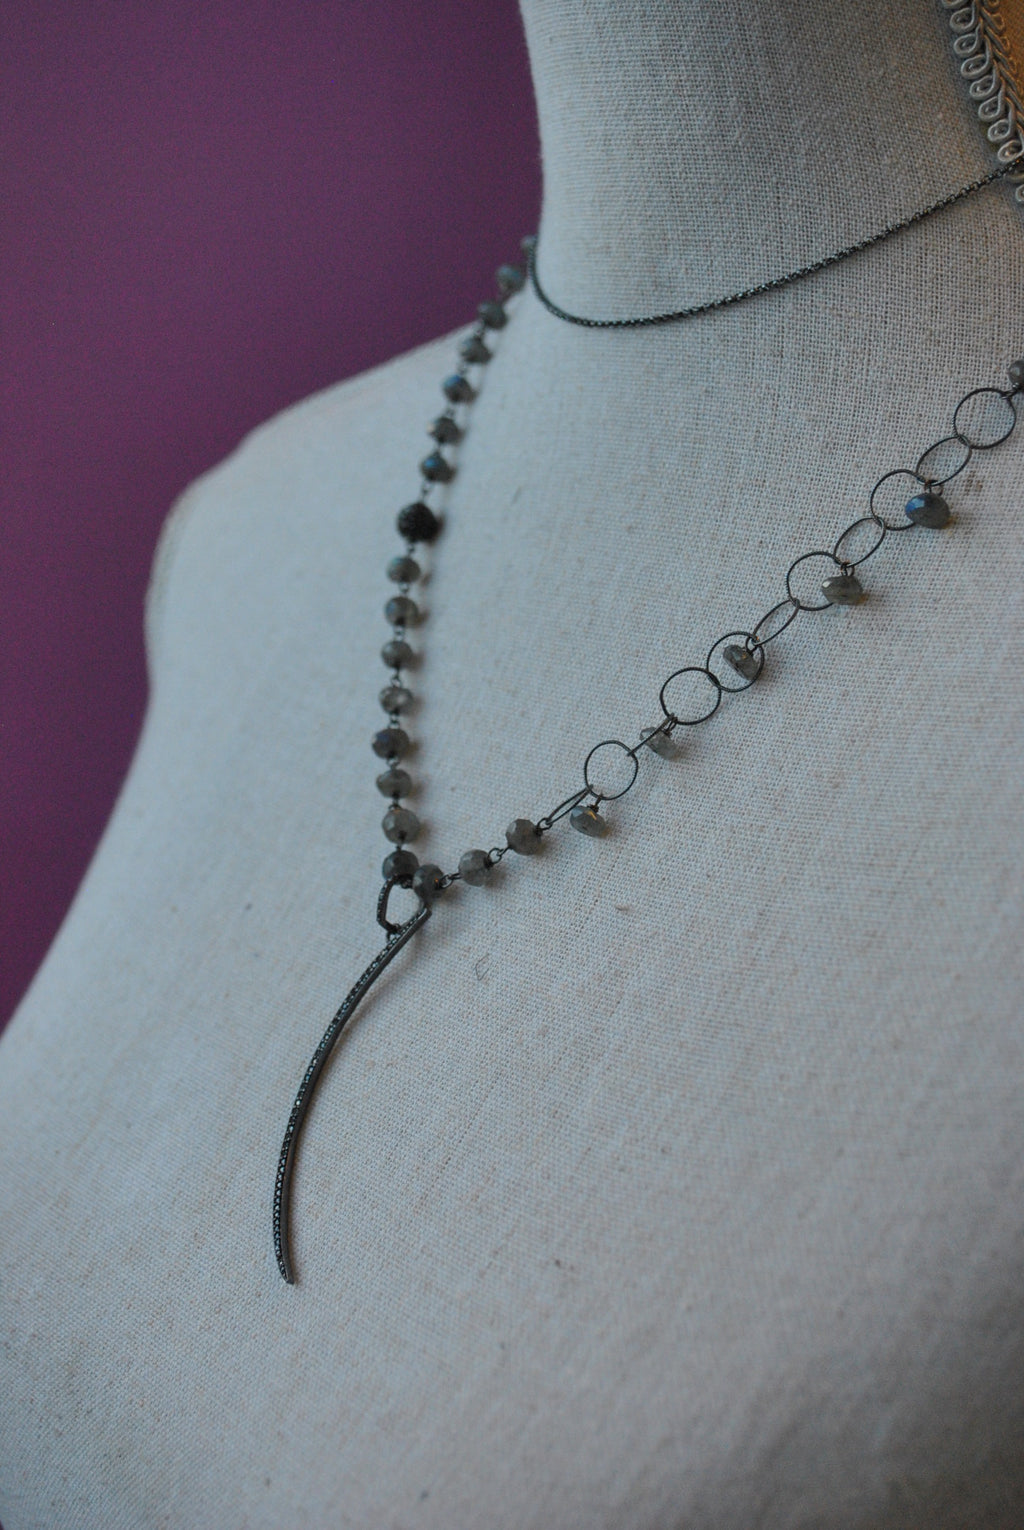 NATURAL LABRADORITE RONDELLES AND RHINESTONES MOON PENDANT STERLING SILVER LONG DELICATE NECKLACE